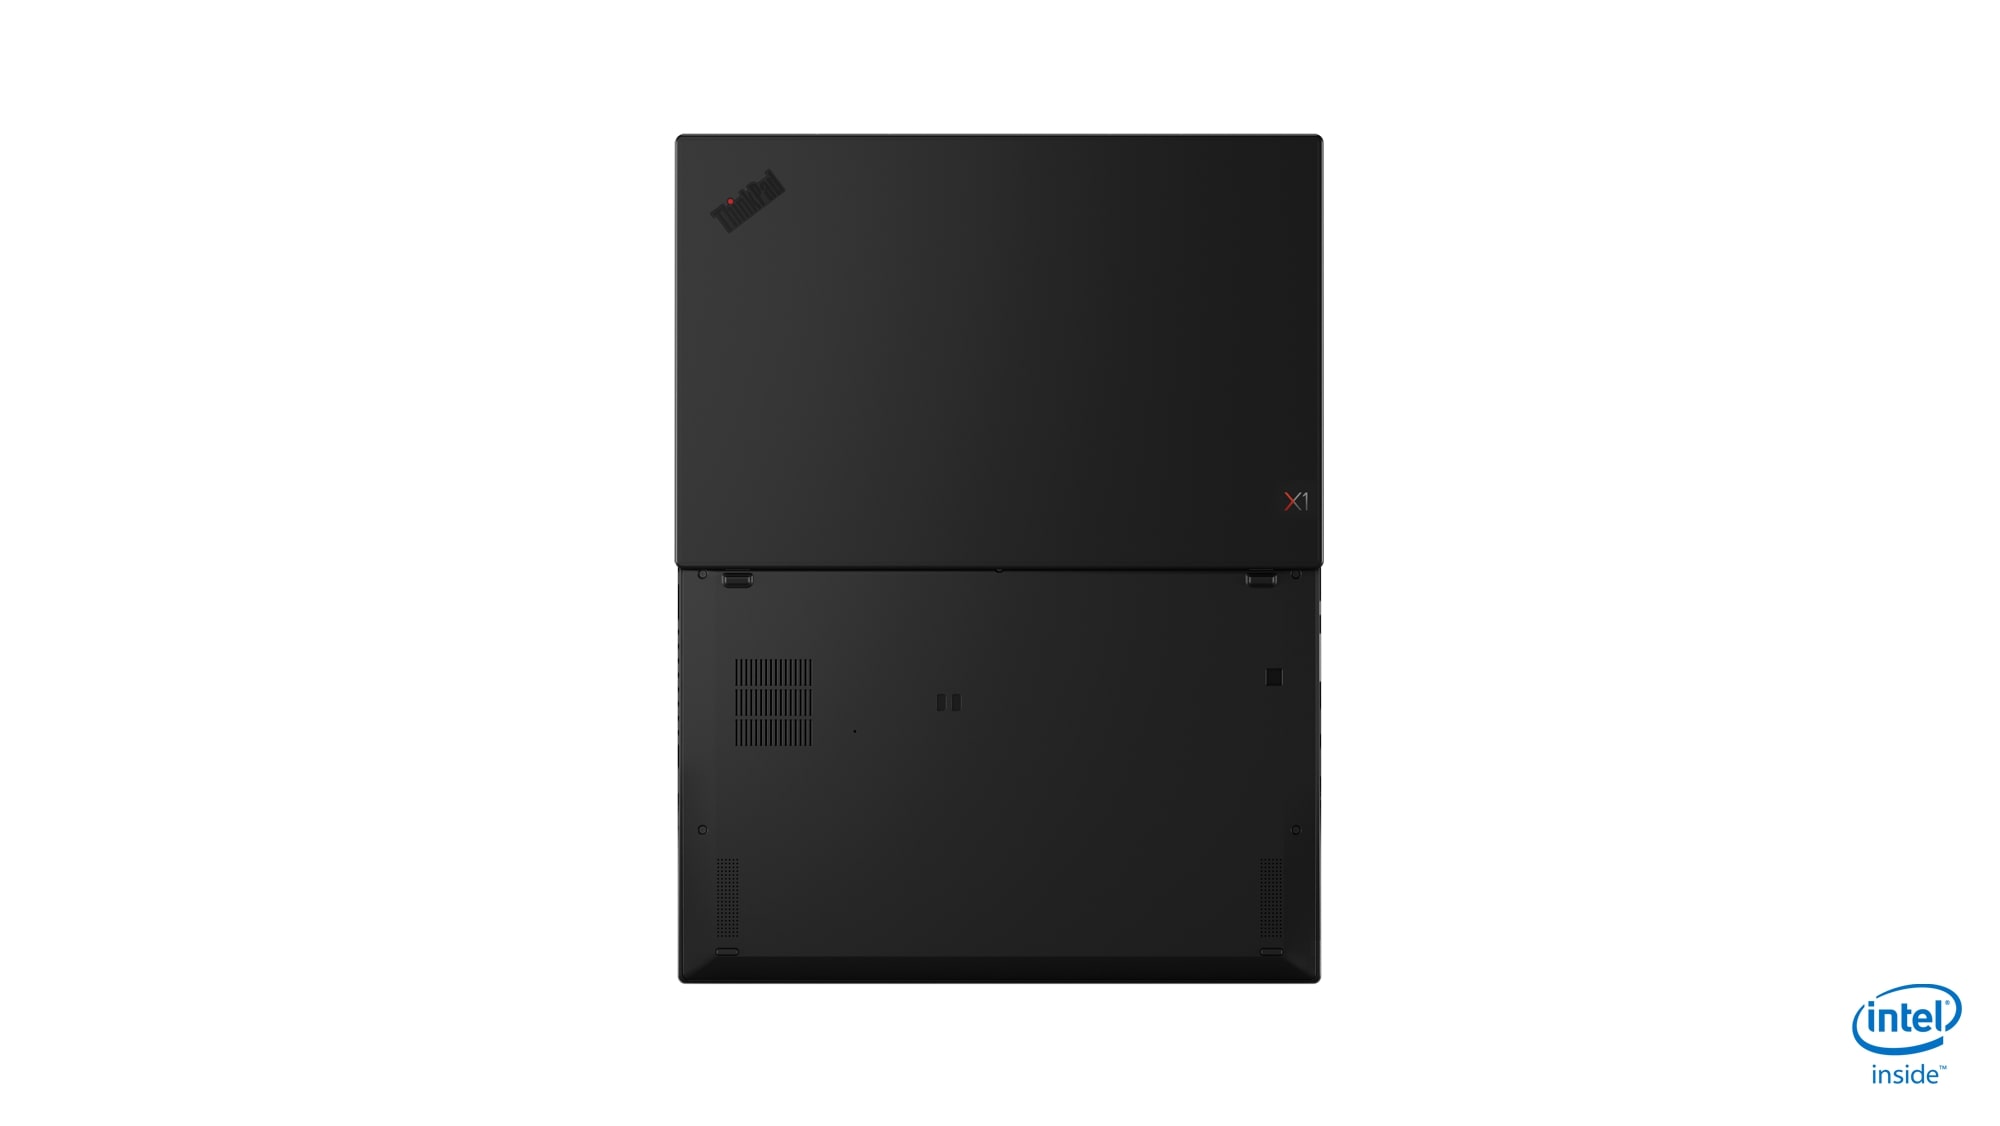 lenovo updated thinkpad x1 carbon yoga ces 2019 15 tour rear facing a d cover